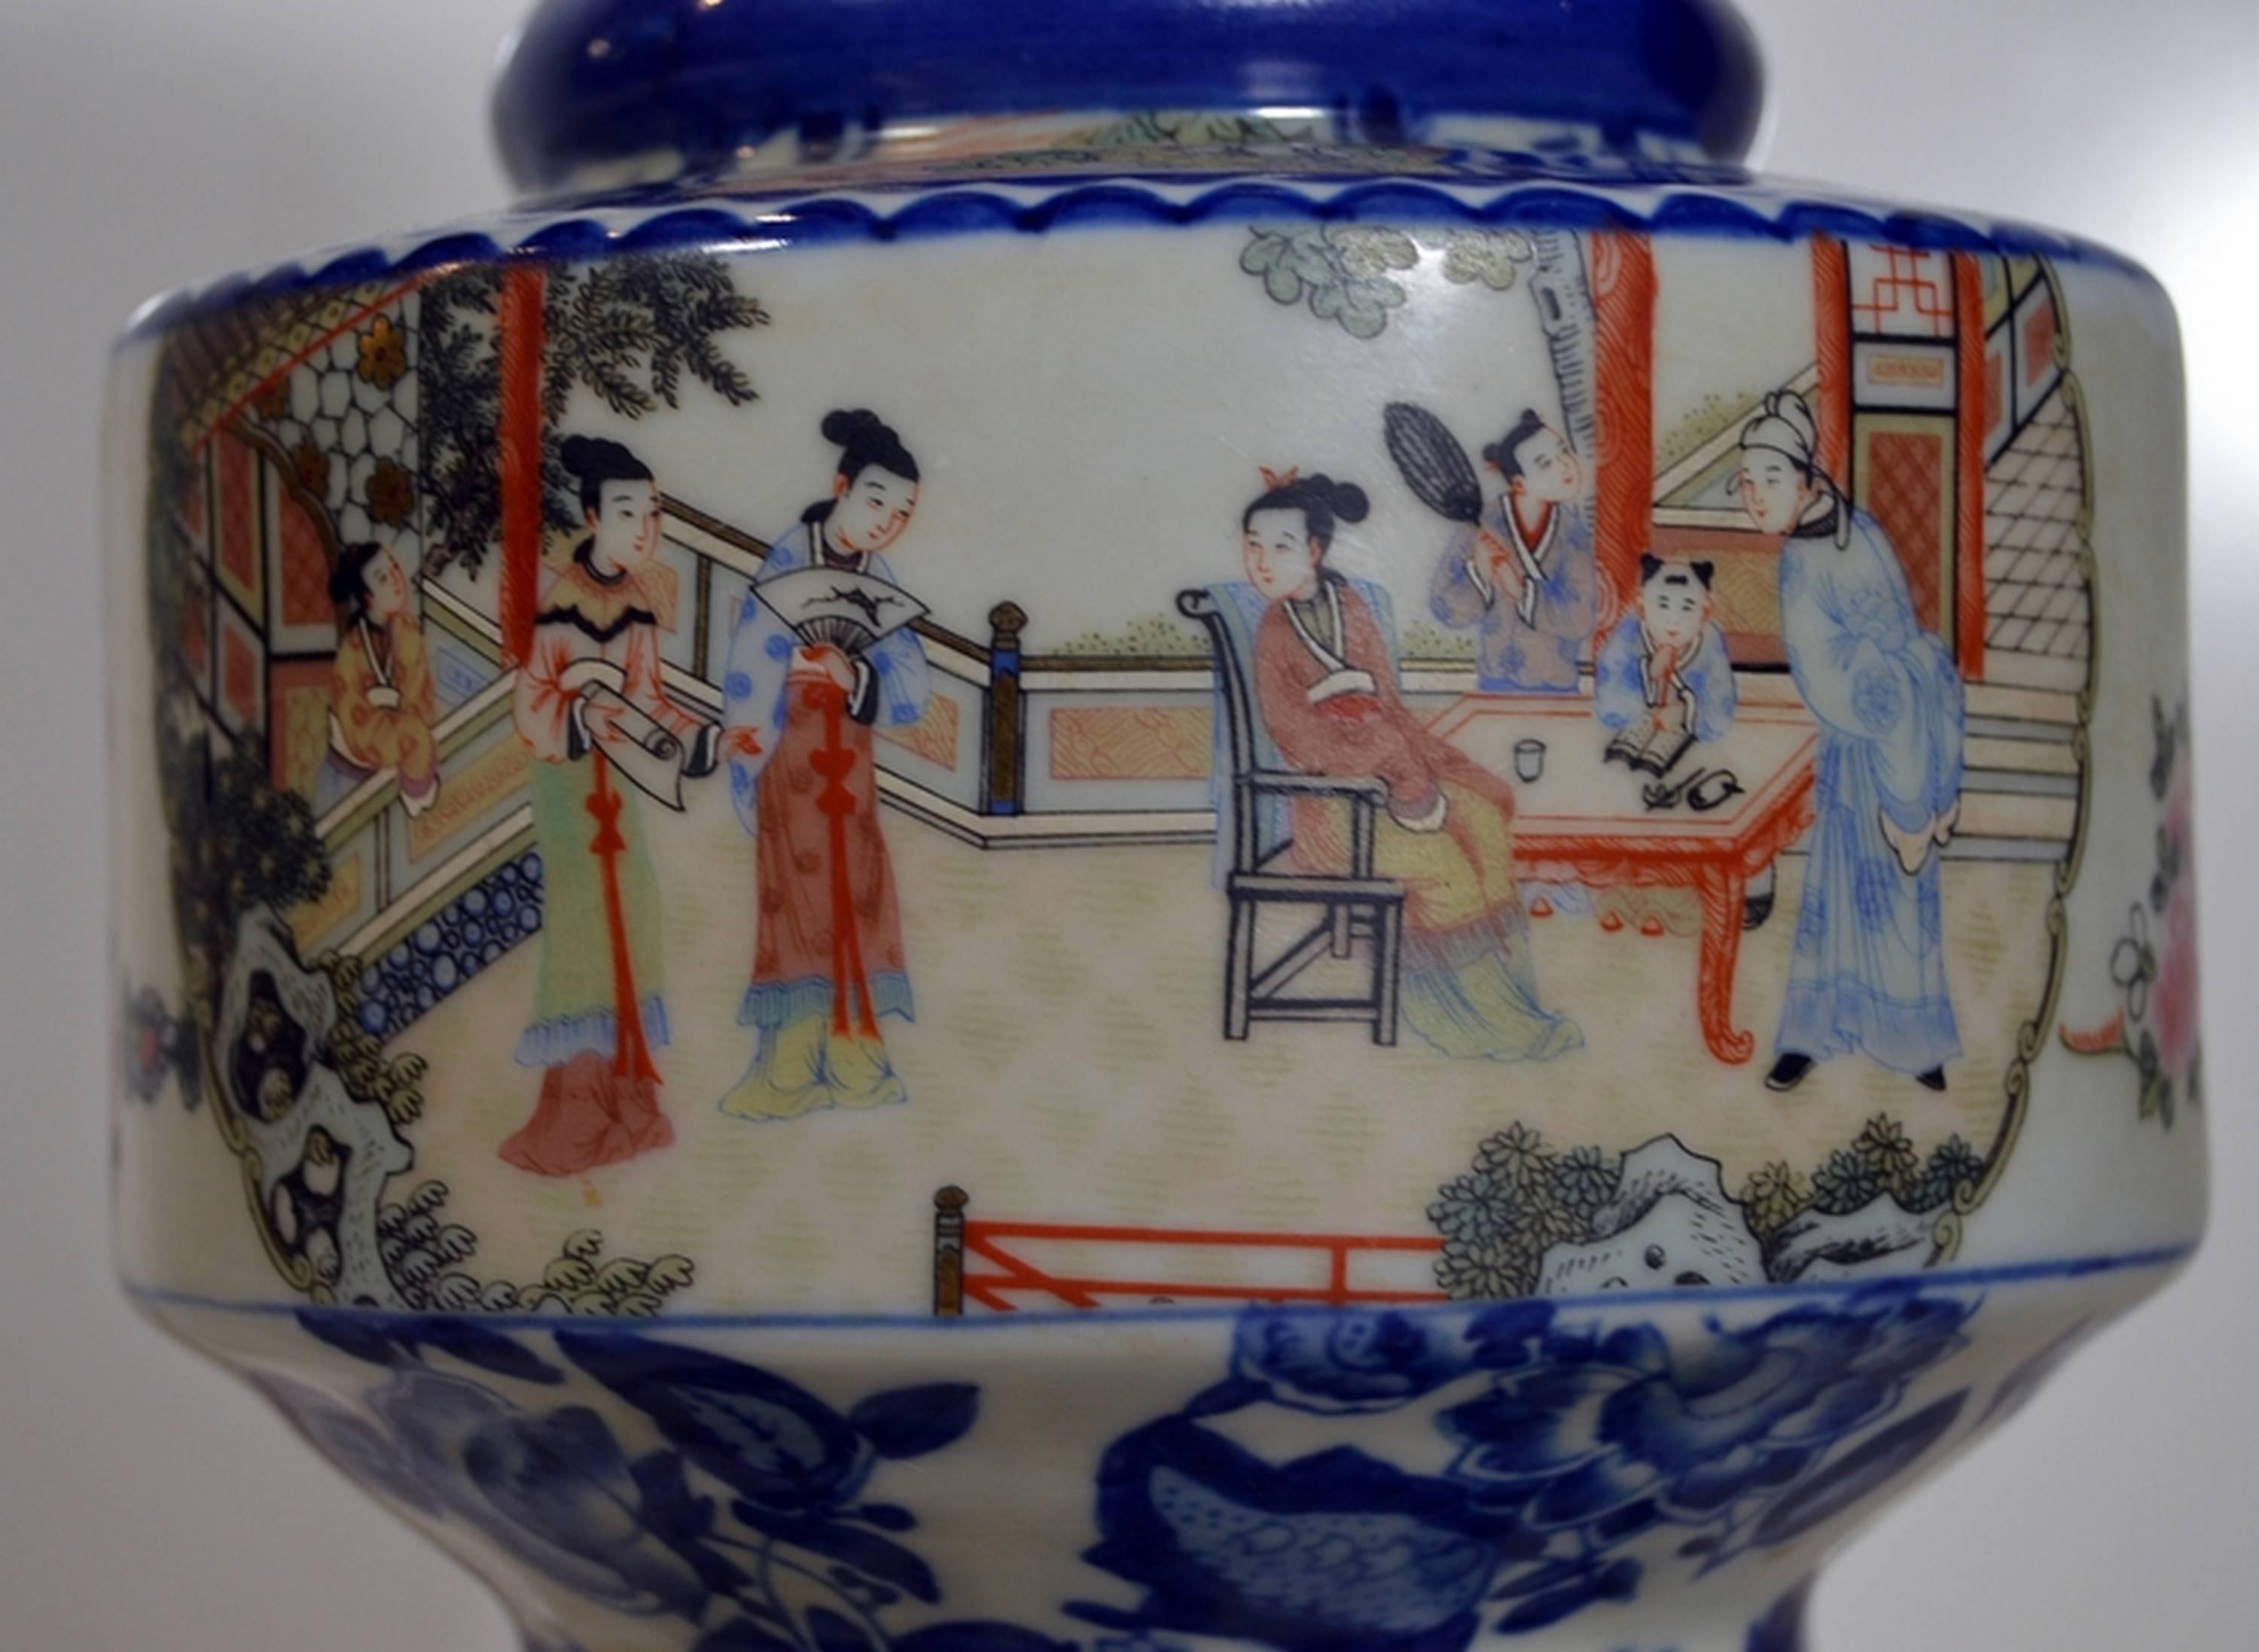 Vintage Chinese Hand-Painted Porcelain Lamp with Characters from the 1970s For Sale 1